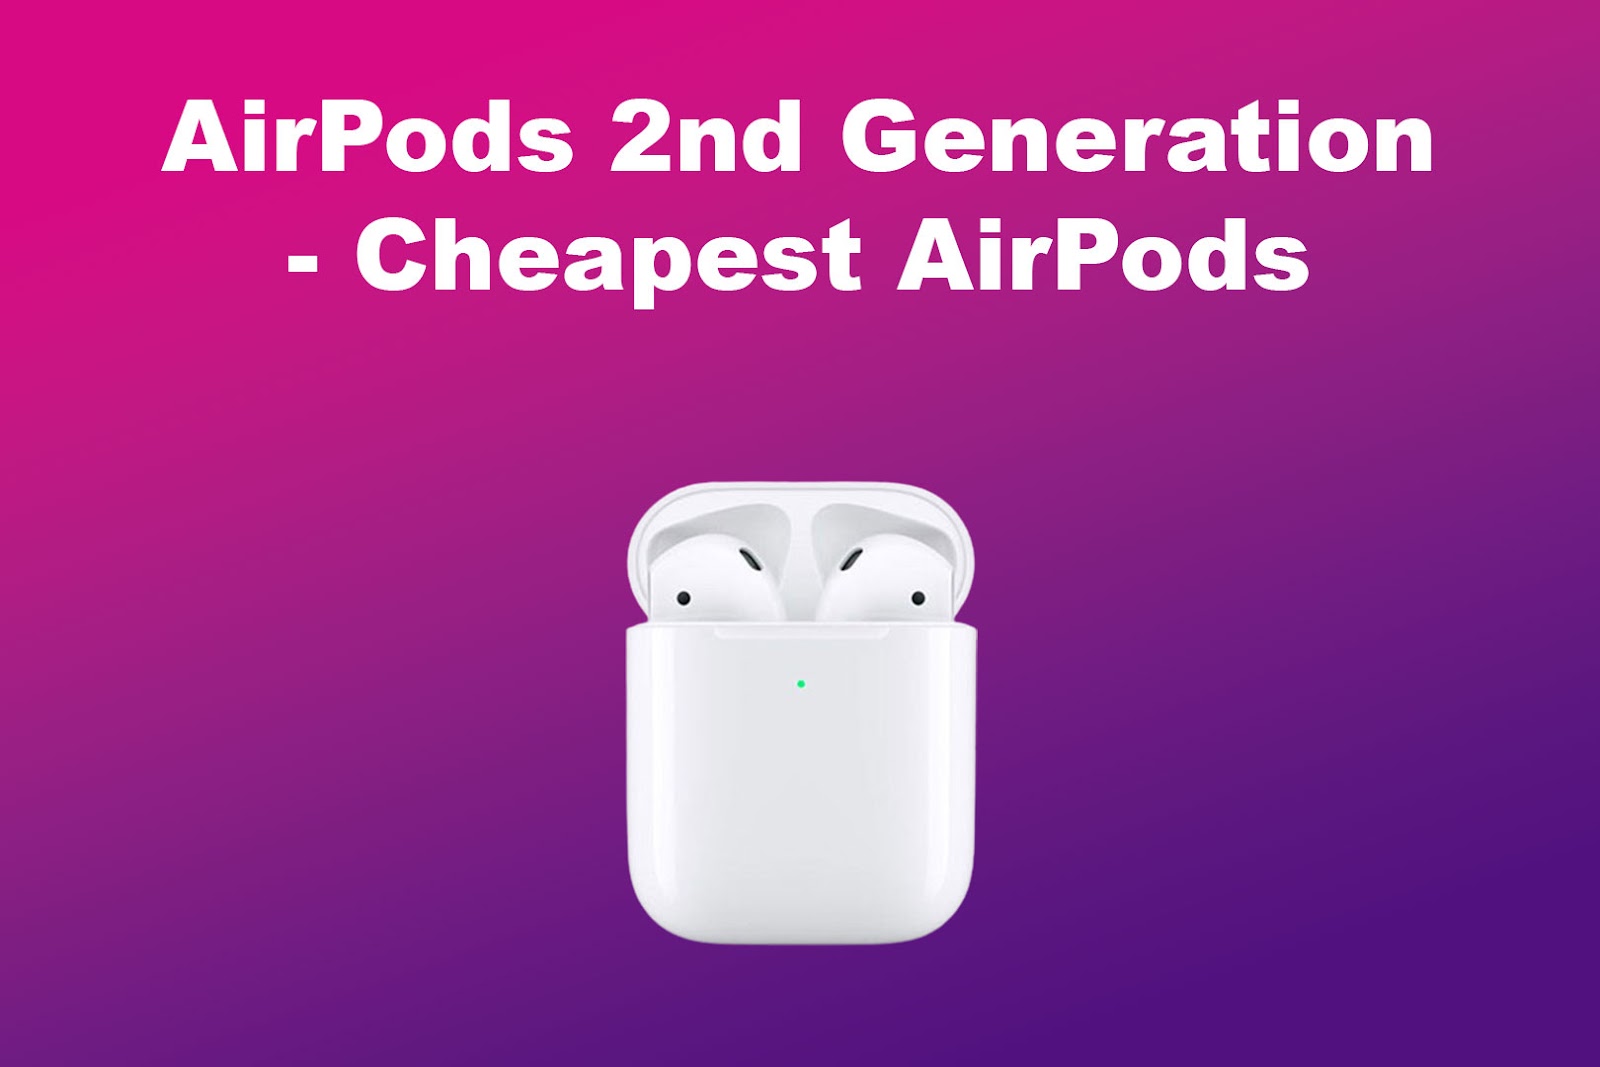 AirPods 2nd Generation - Cheapest AirPods